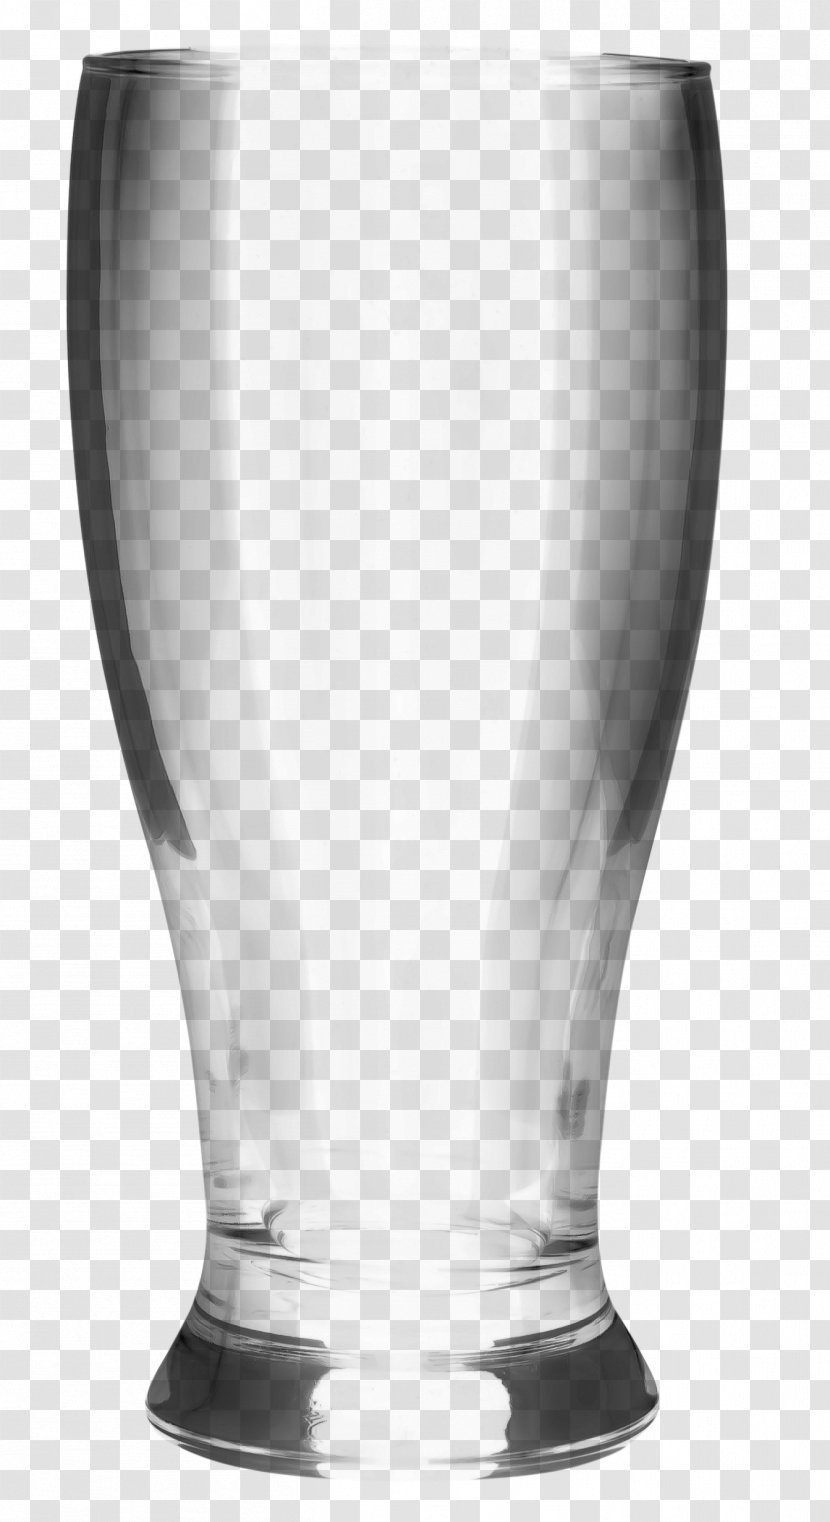 Highball Glass Pint Beer Glasses - Champagne Transparent PNG